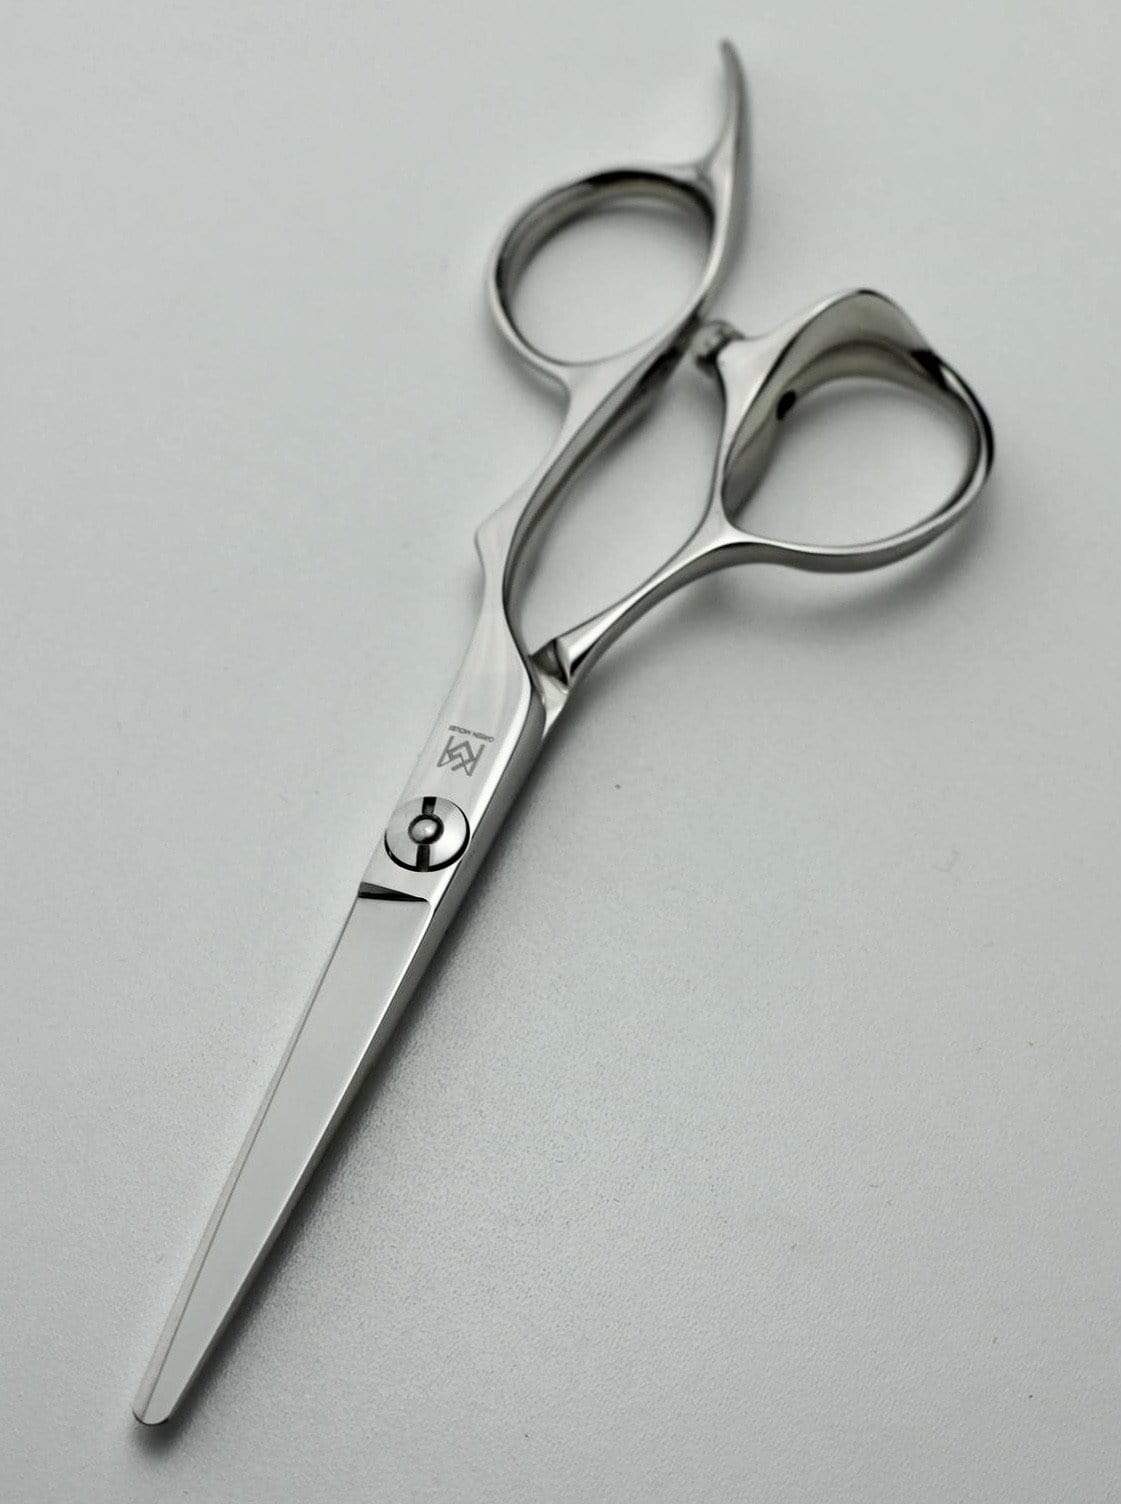 green mouse Hairdressing Scissors Green Mouse Slim Blades